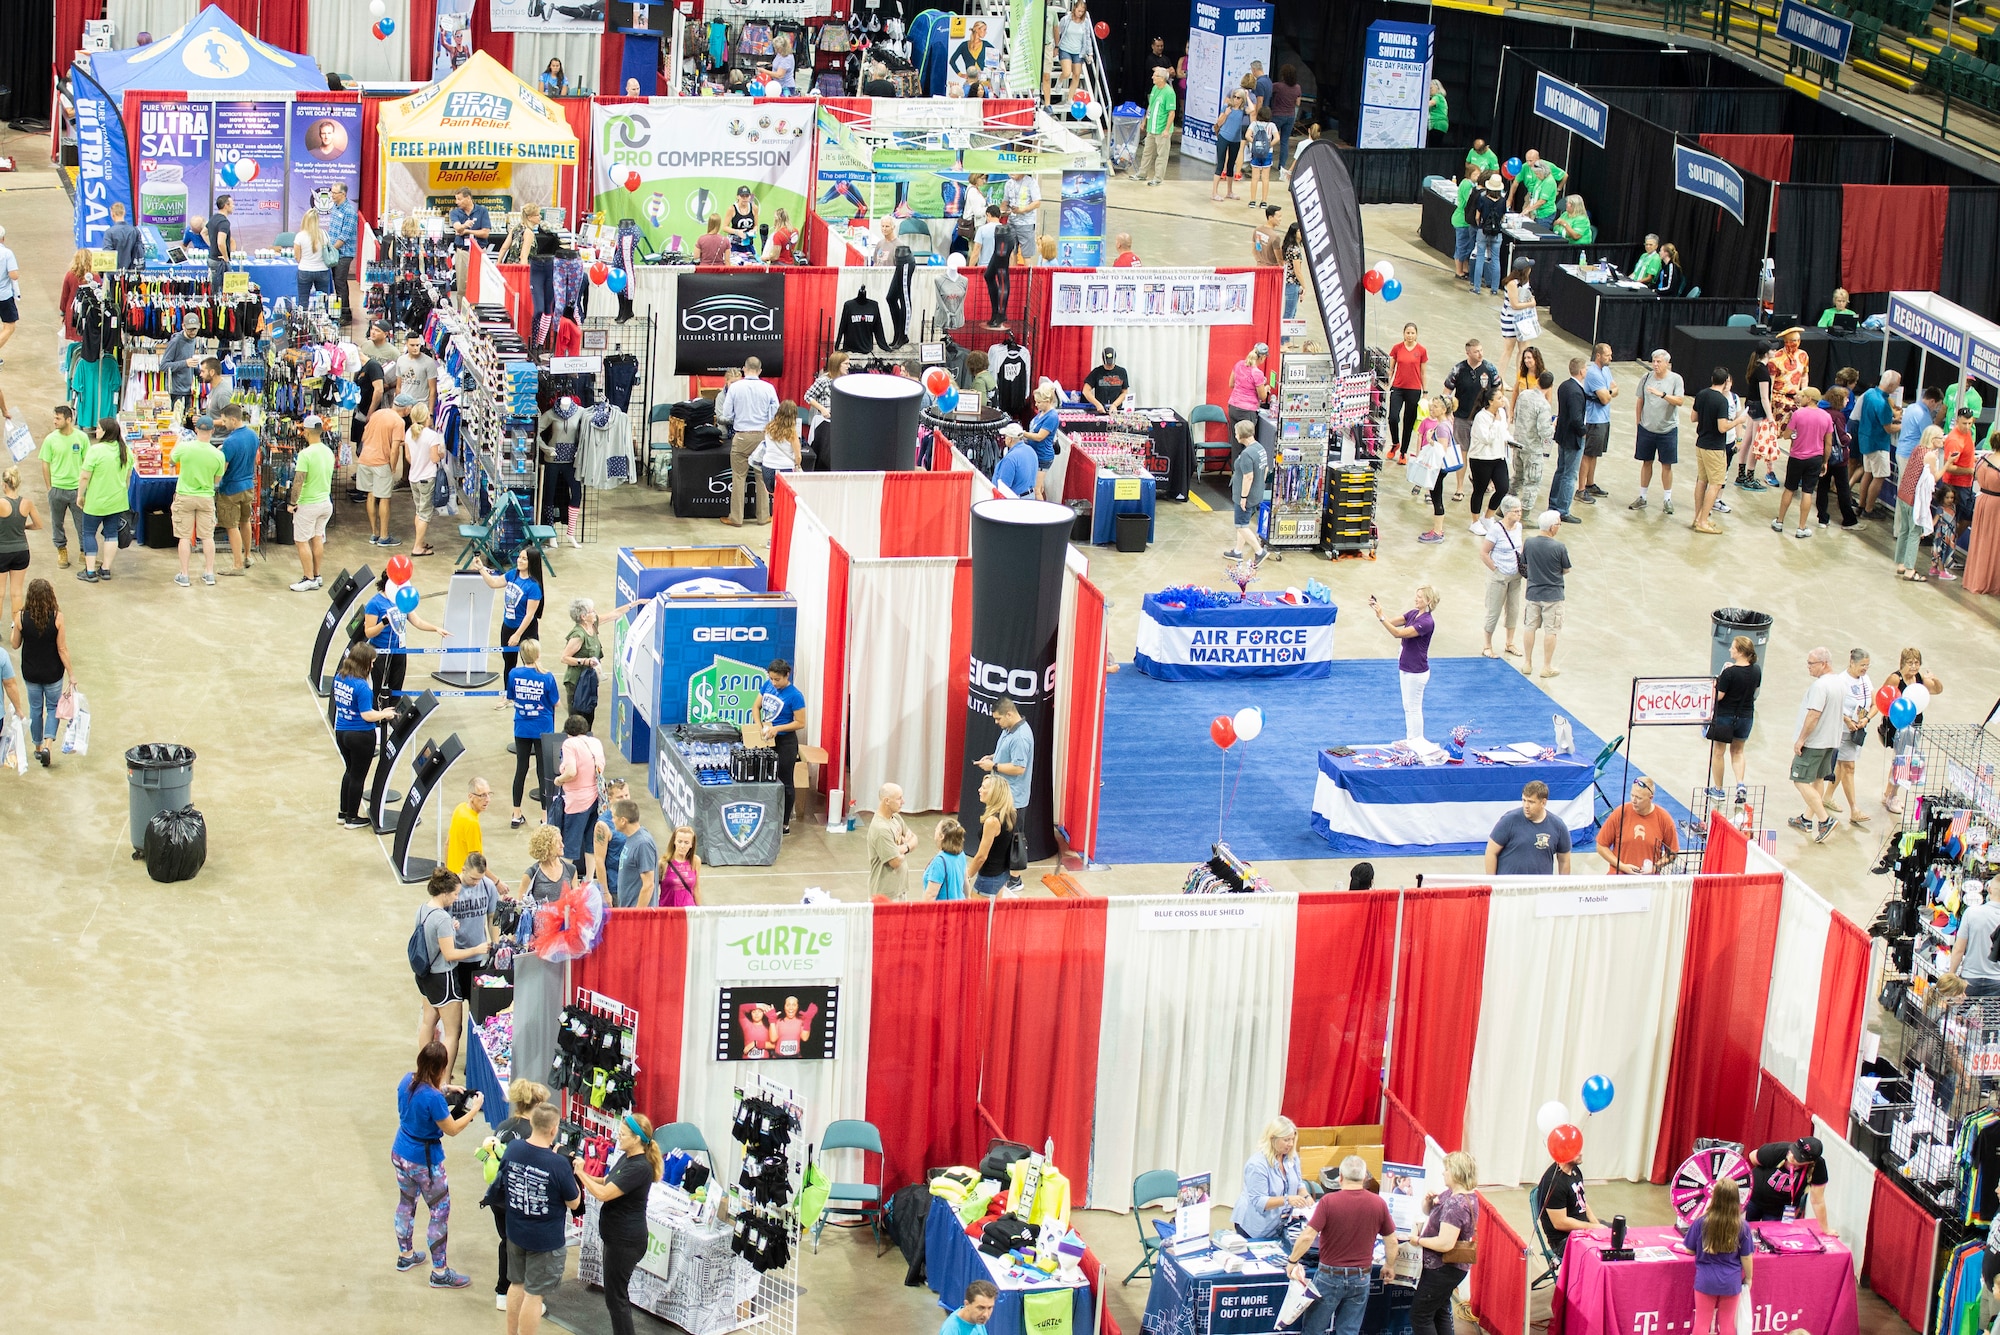 2019 U.S. Air Force Marathon fitness expo attendees check out vendor booths inside the Wright State University Nutter Center in Fairborn, Ohio, Sept. 20, 2019. The two day expo allowed runners to pick up their runners bib and any last minute gear needed for the race. (U.S. Air Force photo by Wesley Farnsworth)